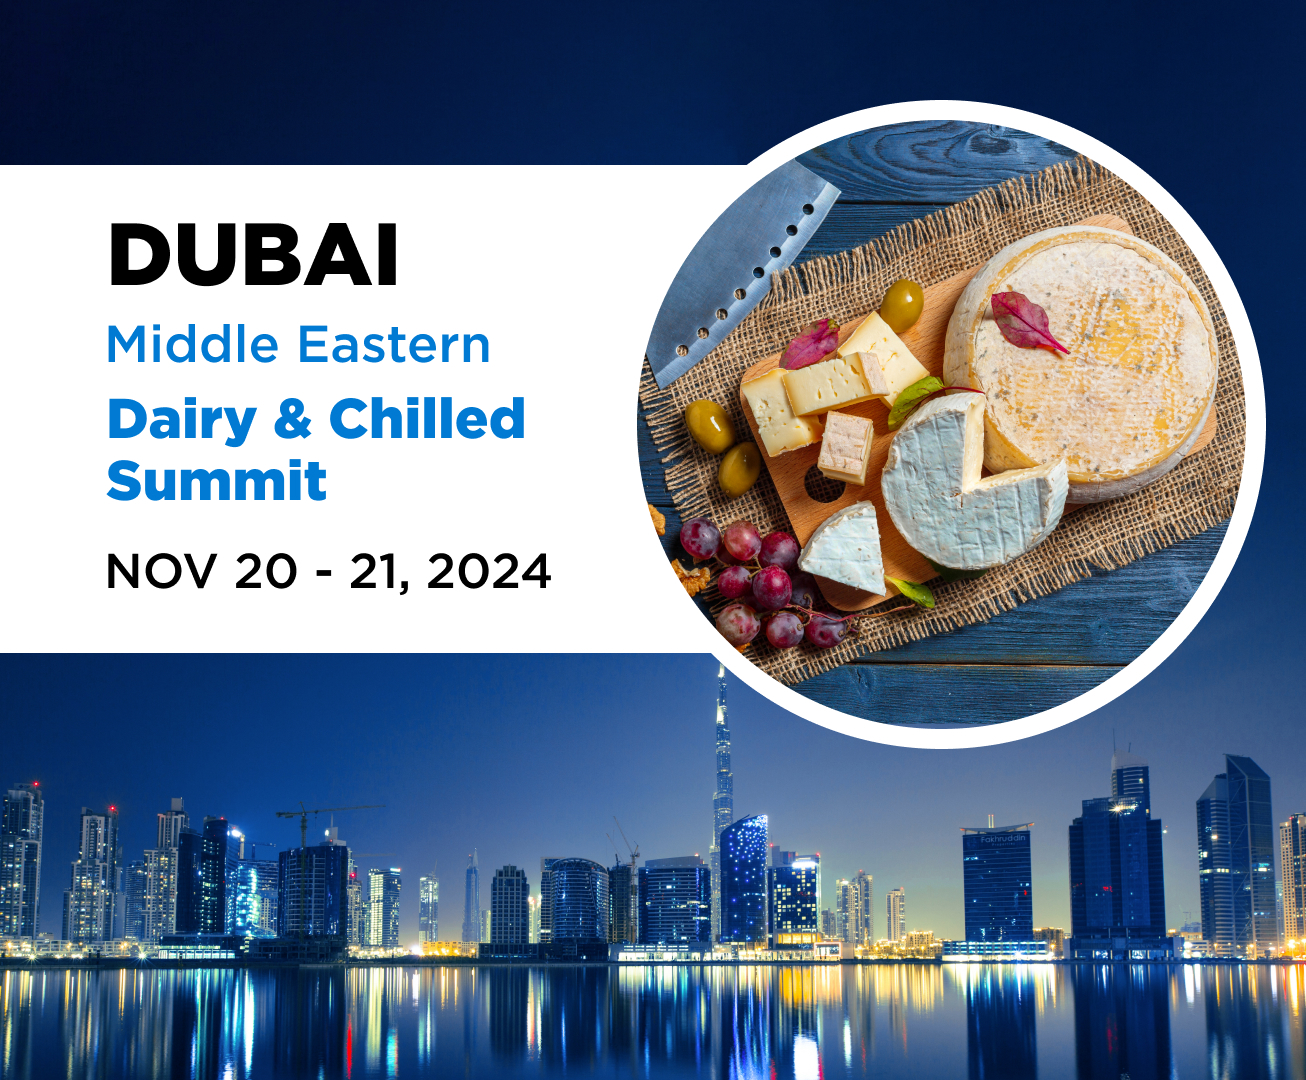 MIDDLE EASTERN DAIRY & CHILLED SUMMIT